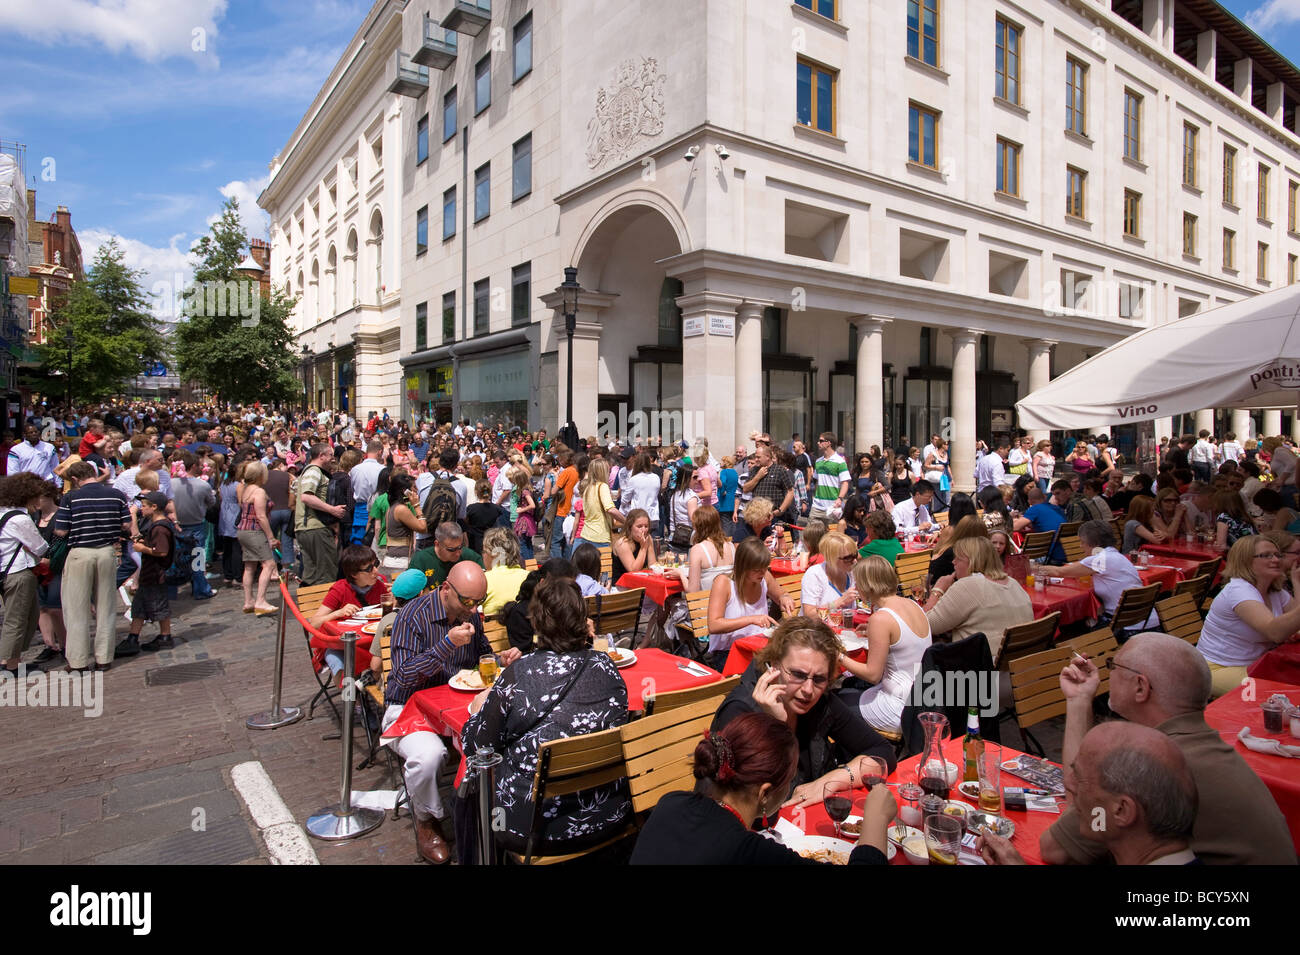 Covent Garden crowded with tourists London United Kingdom Stock Photo